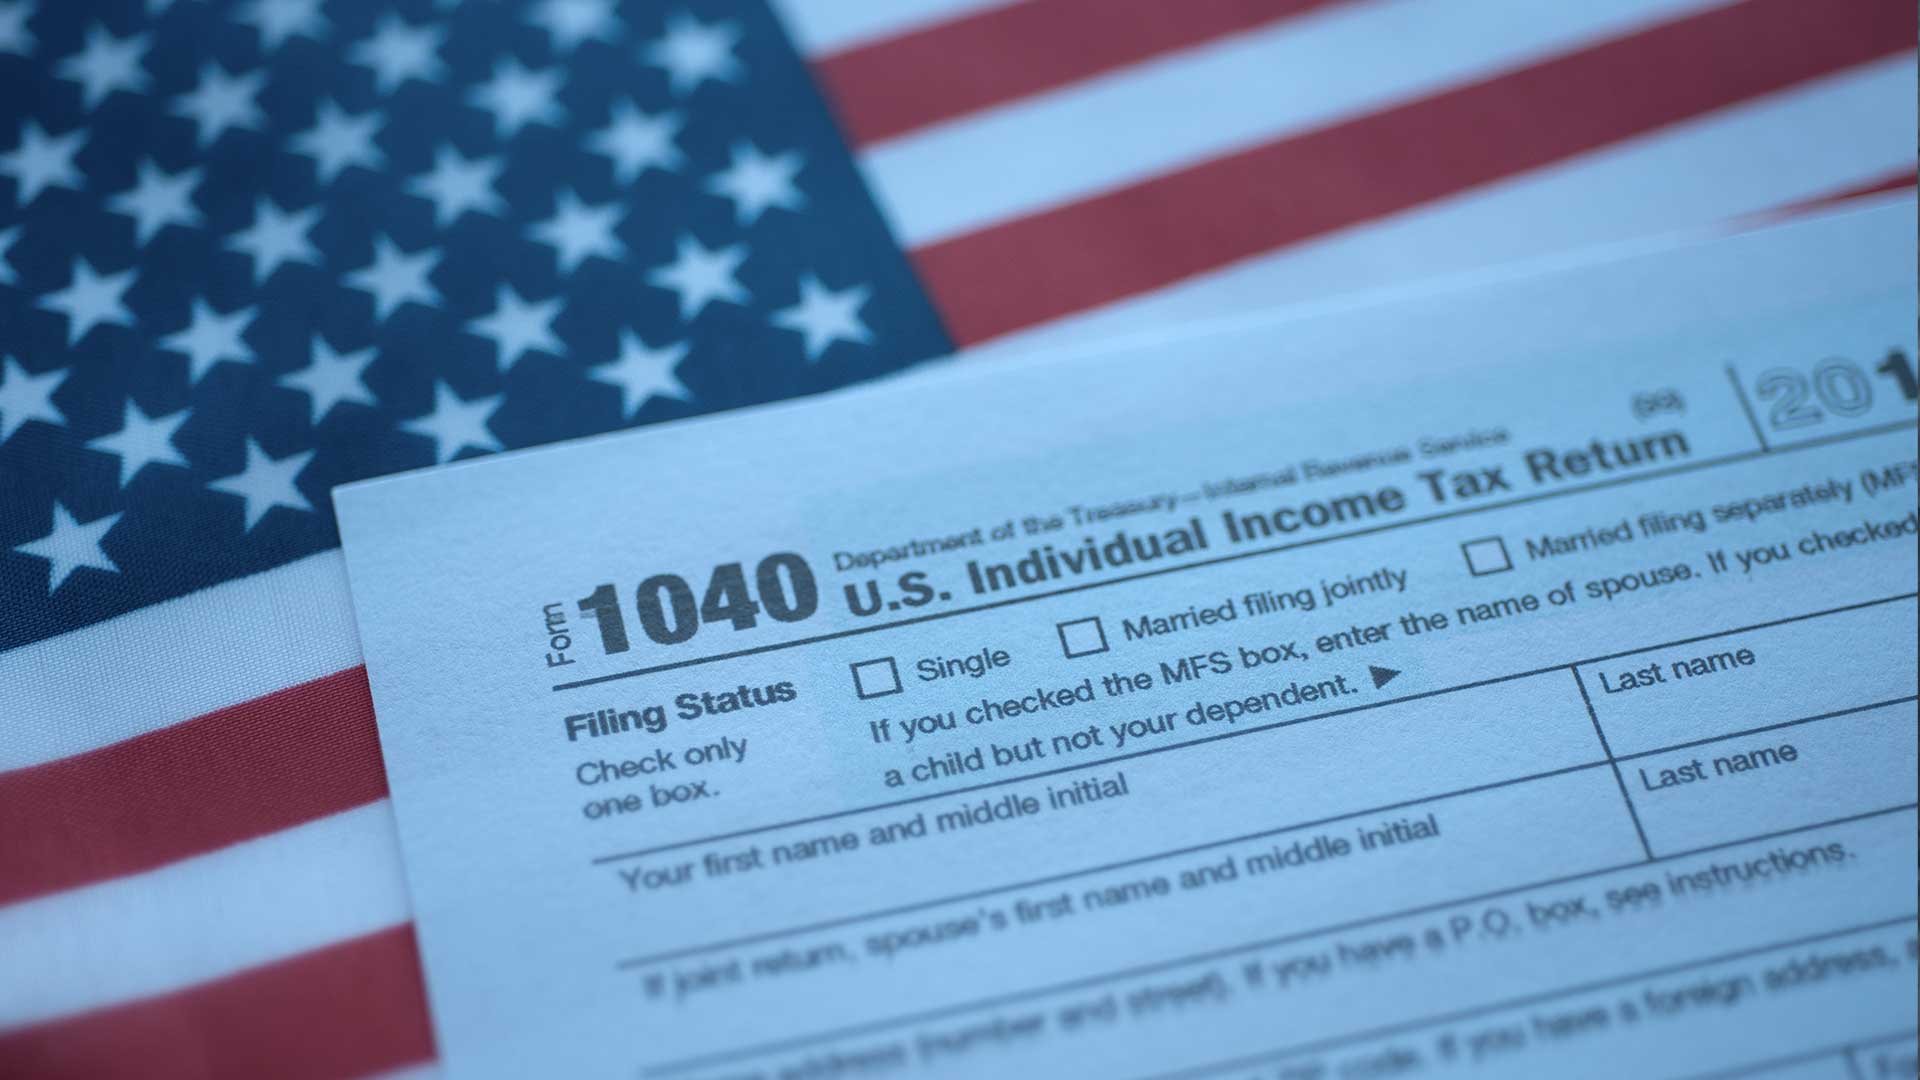 Form 1040 for U.S. Individual Income Tax Requirements